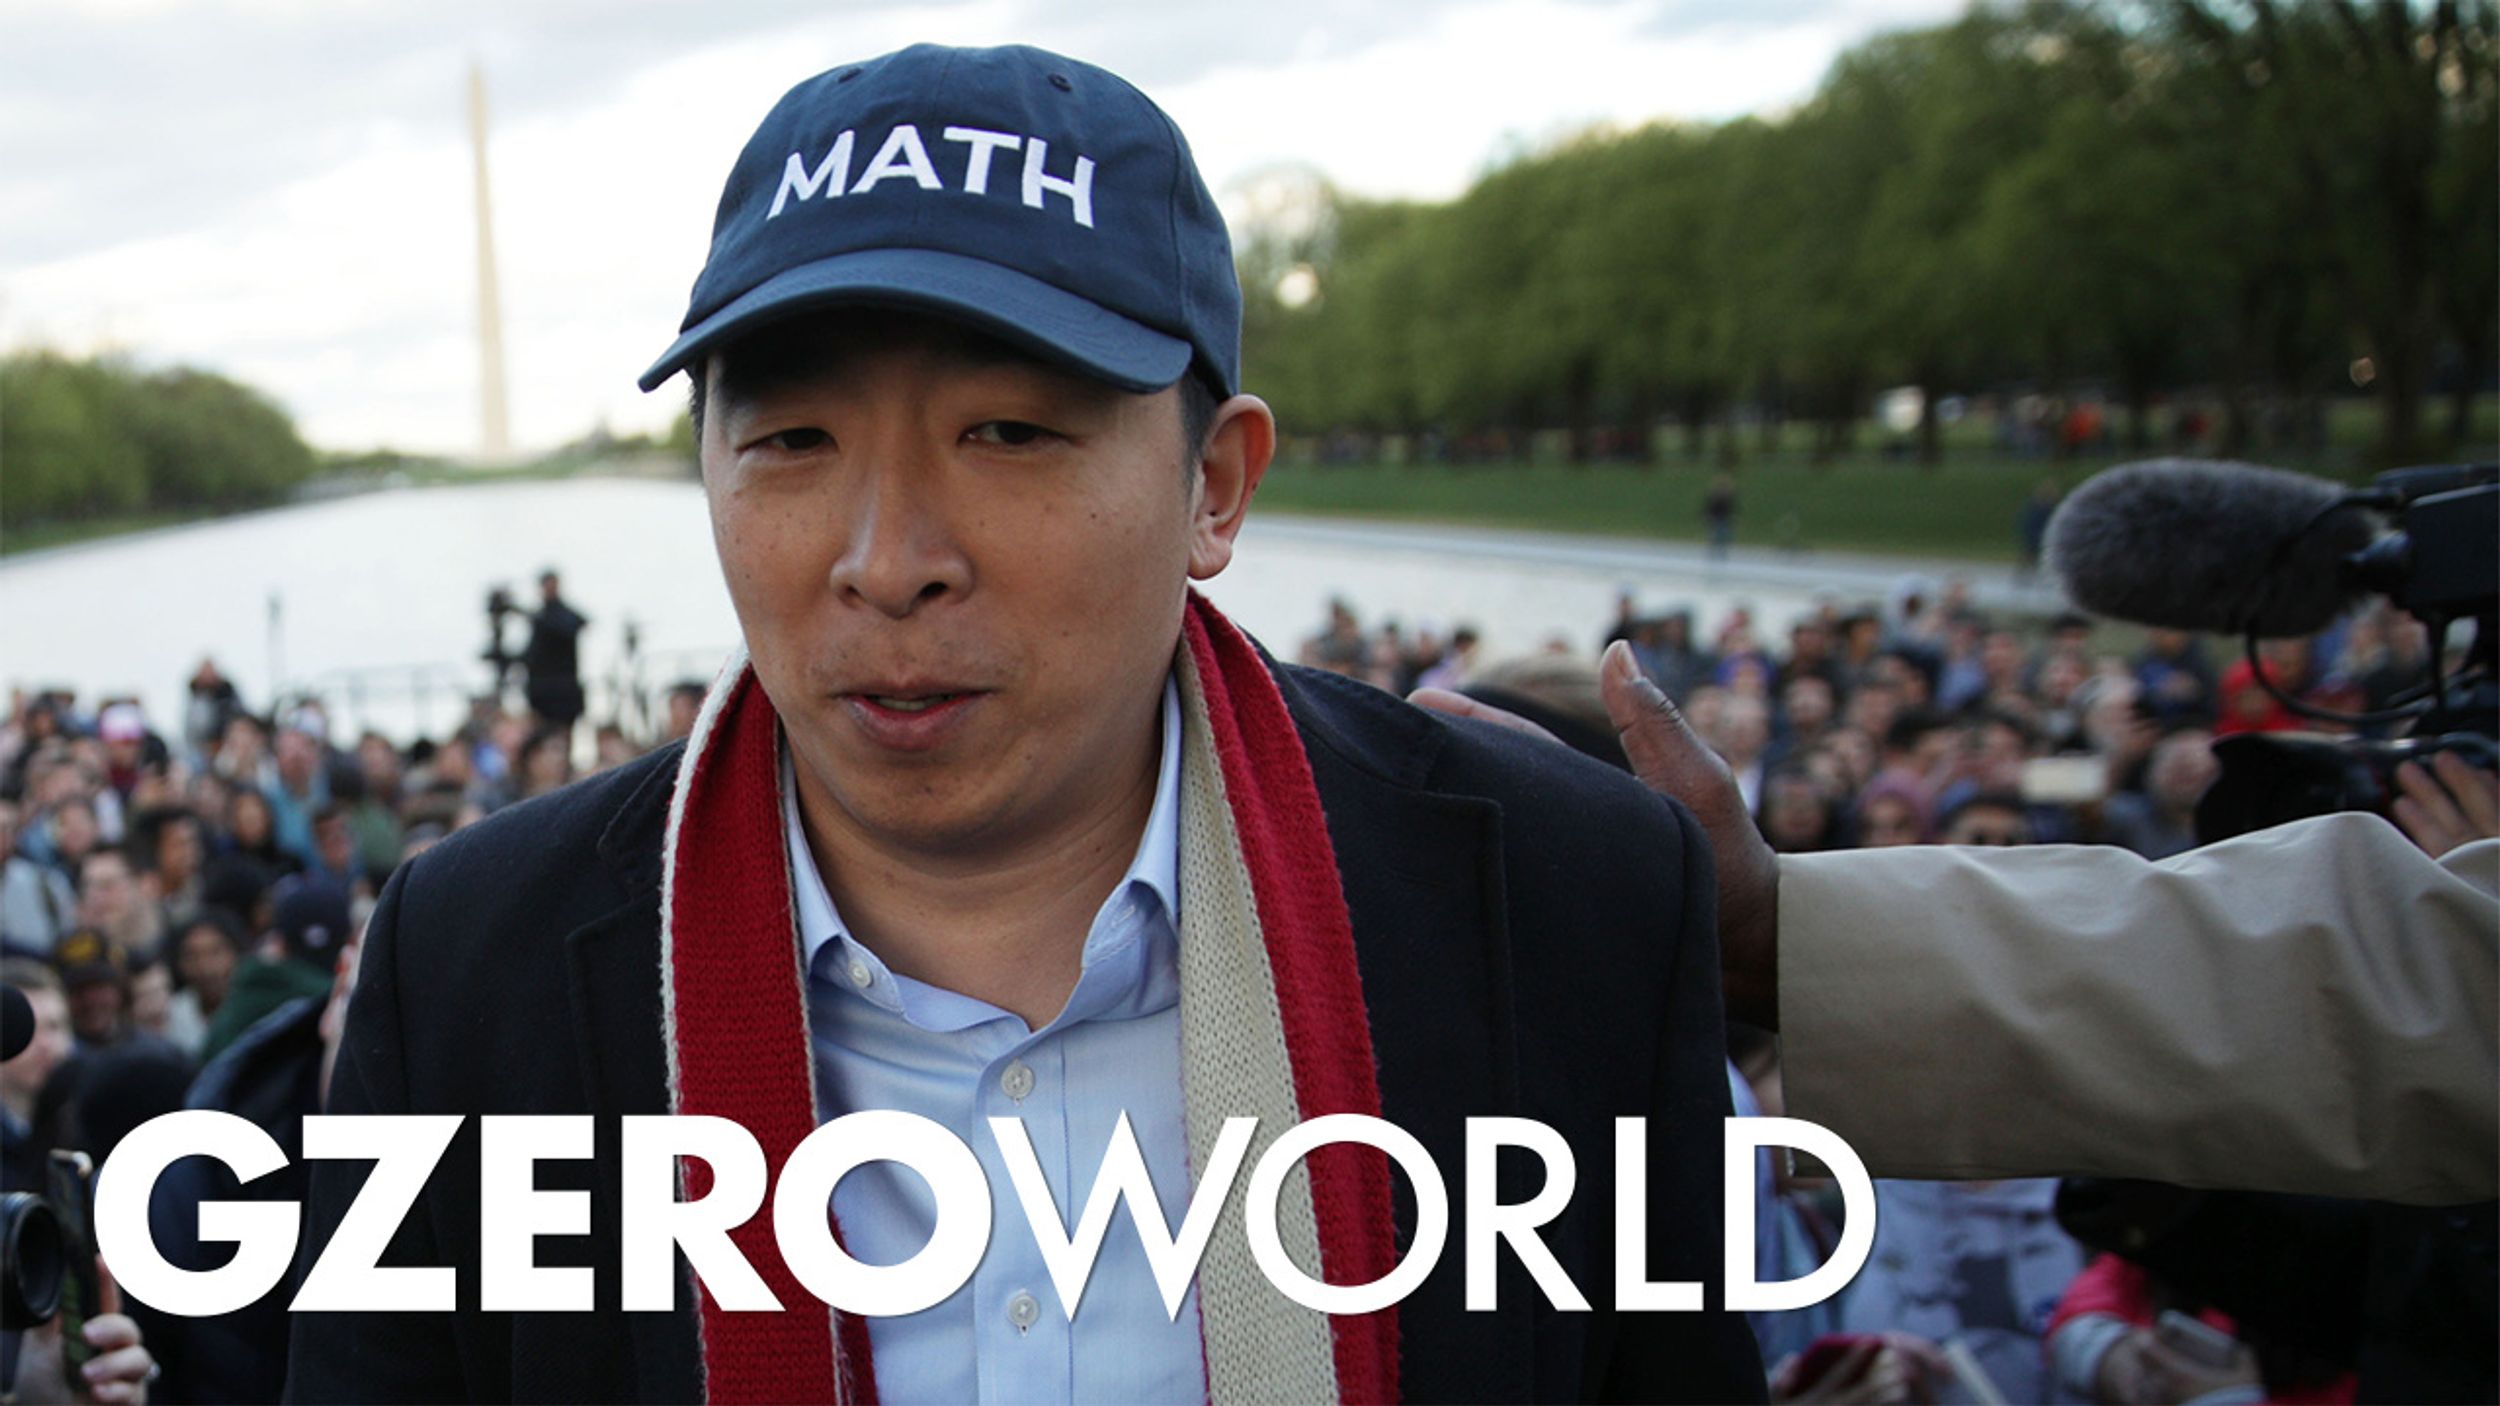 Andrew Yang Shows His Work